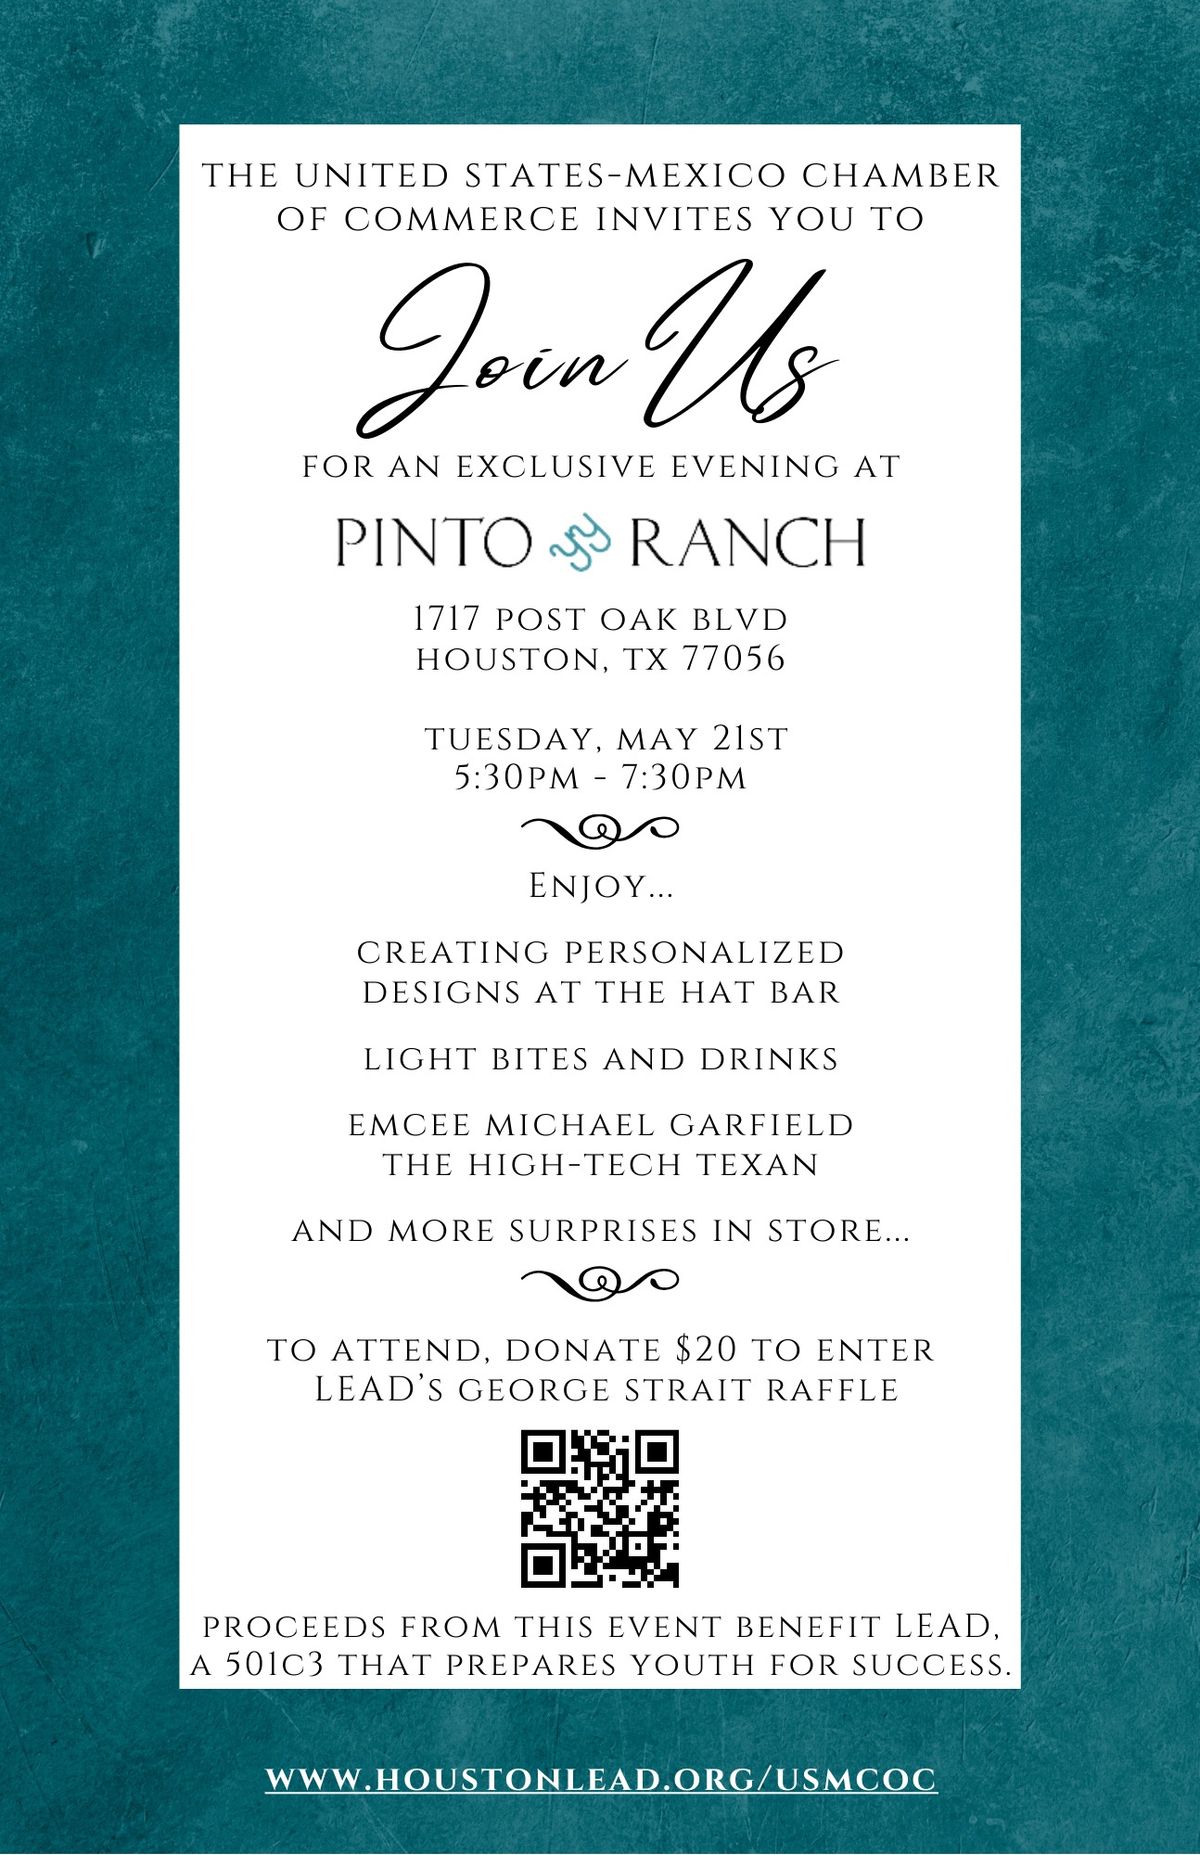 Exlusive Event at Pinto Ranch